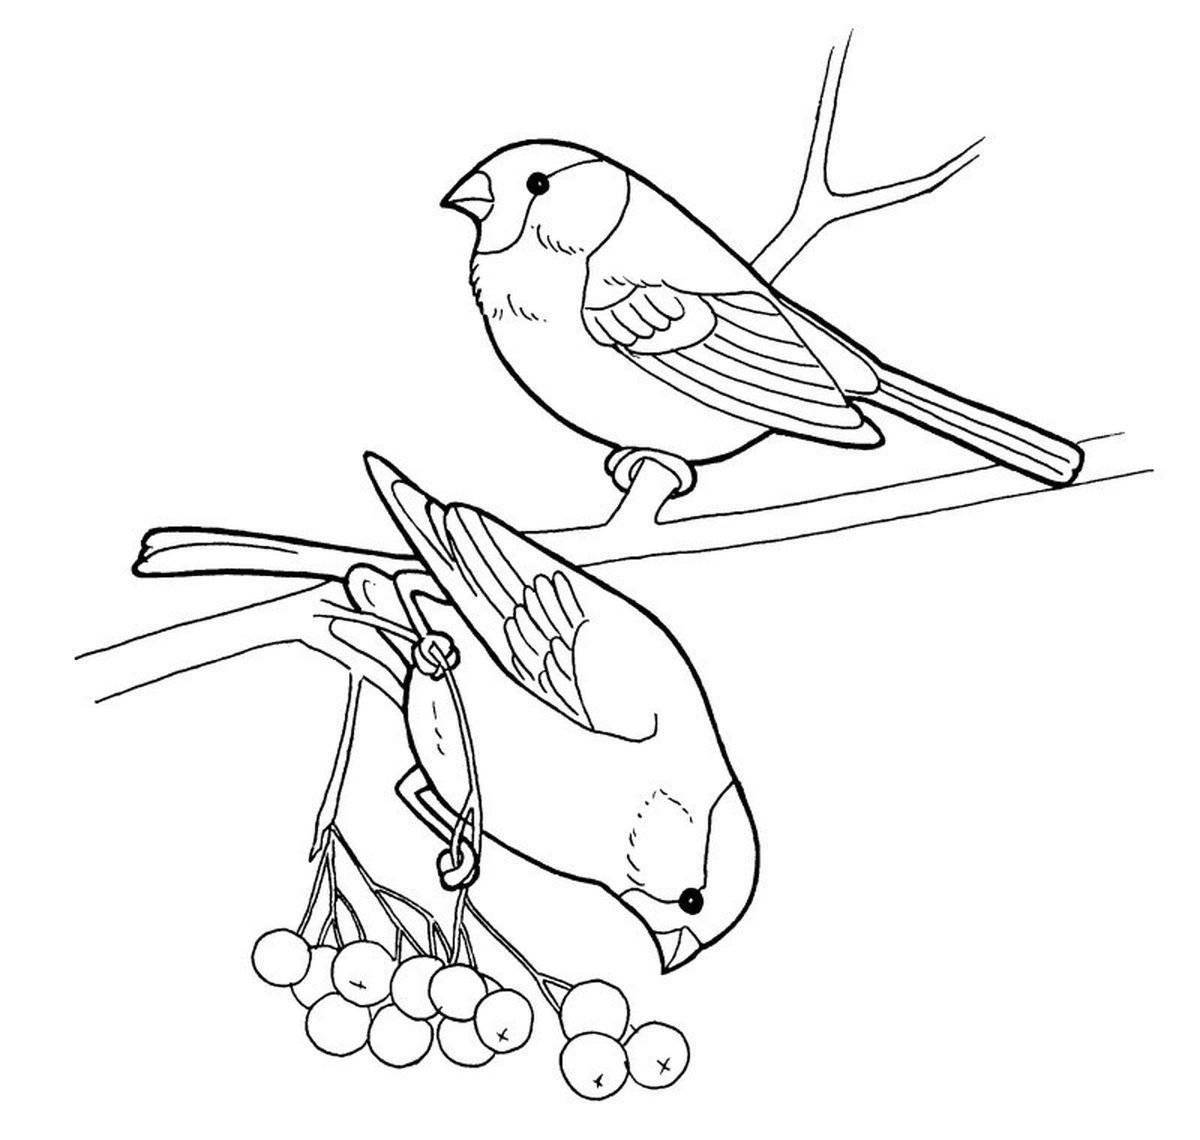 Coloring pages of wintering birds for children 2-3 years old